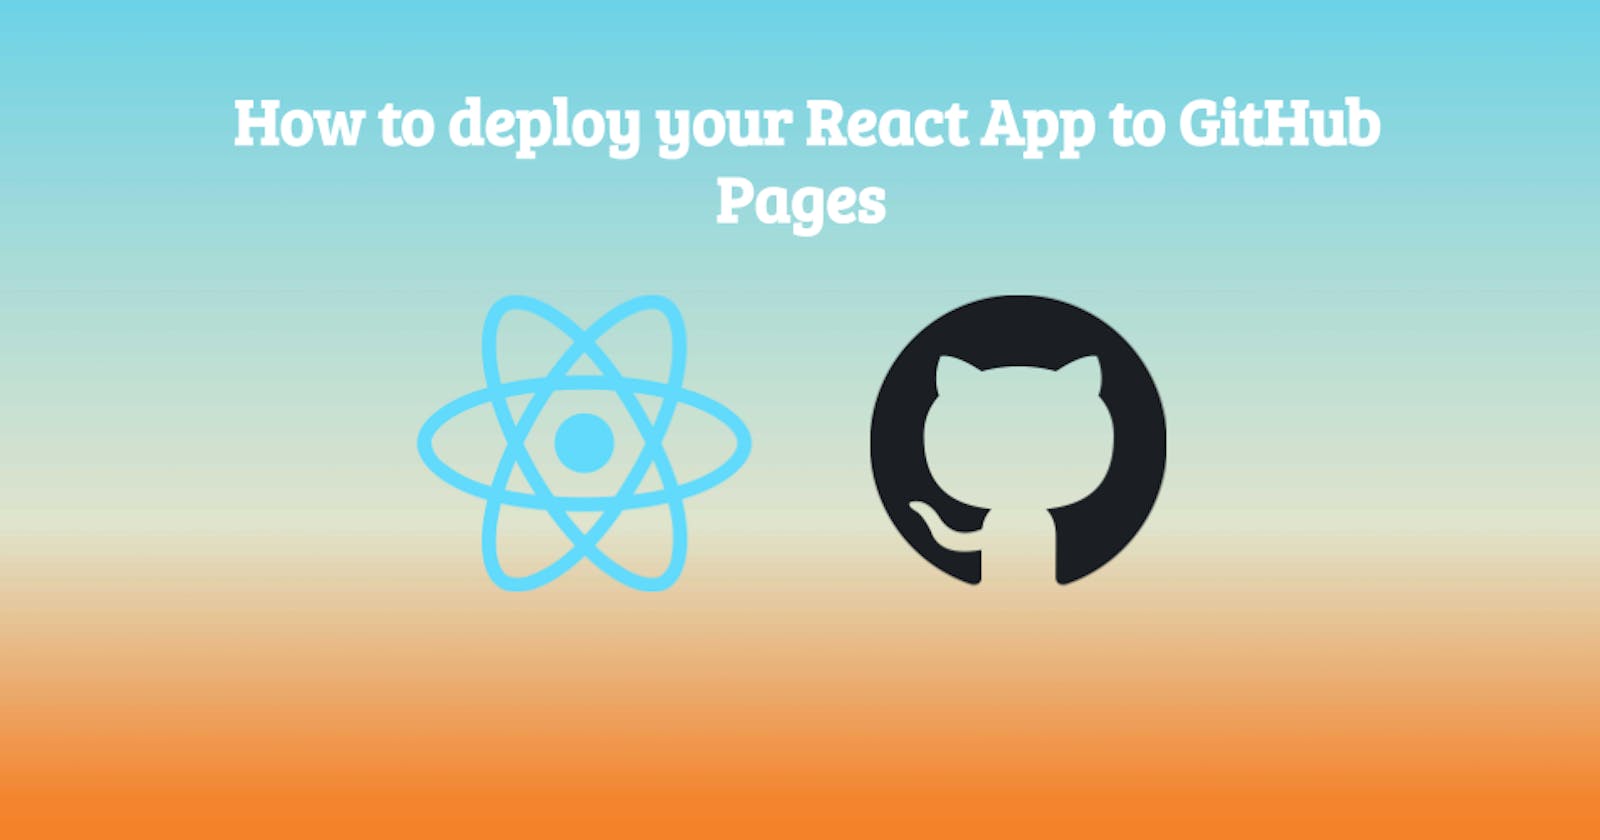 How to deploy your React App to GitHub Pages